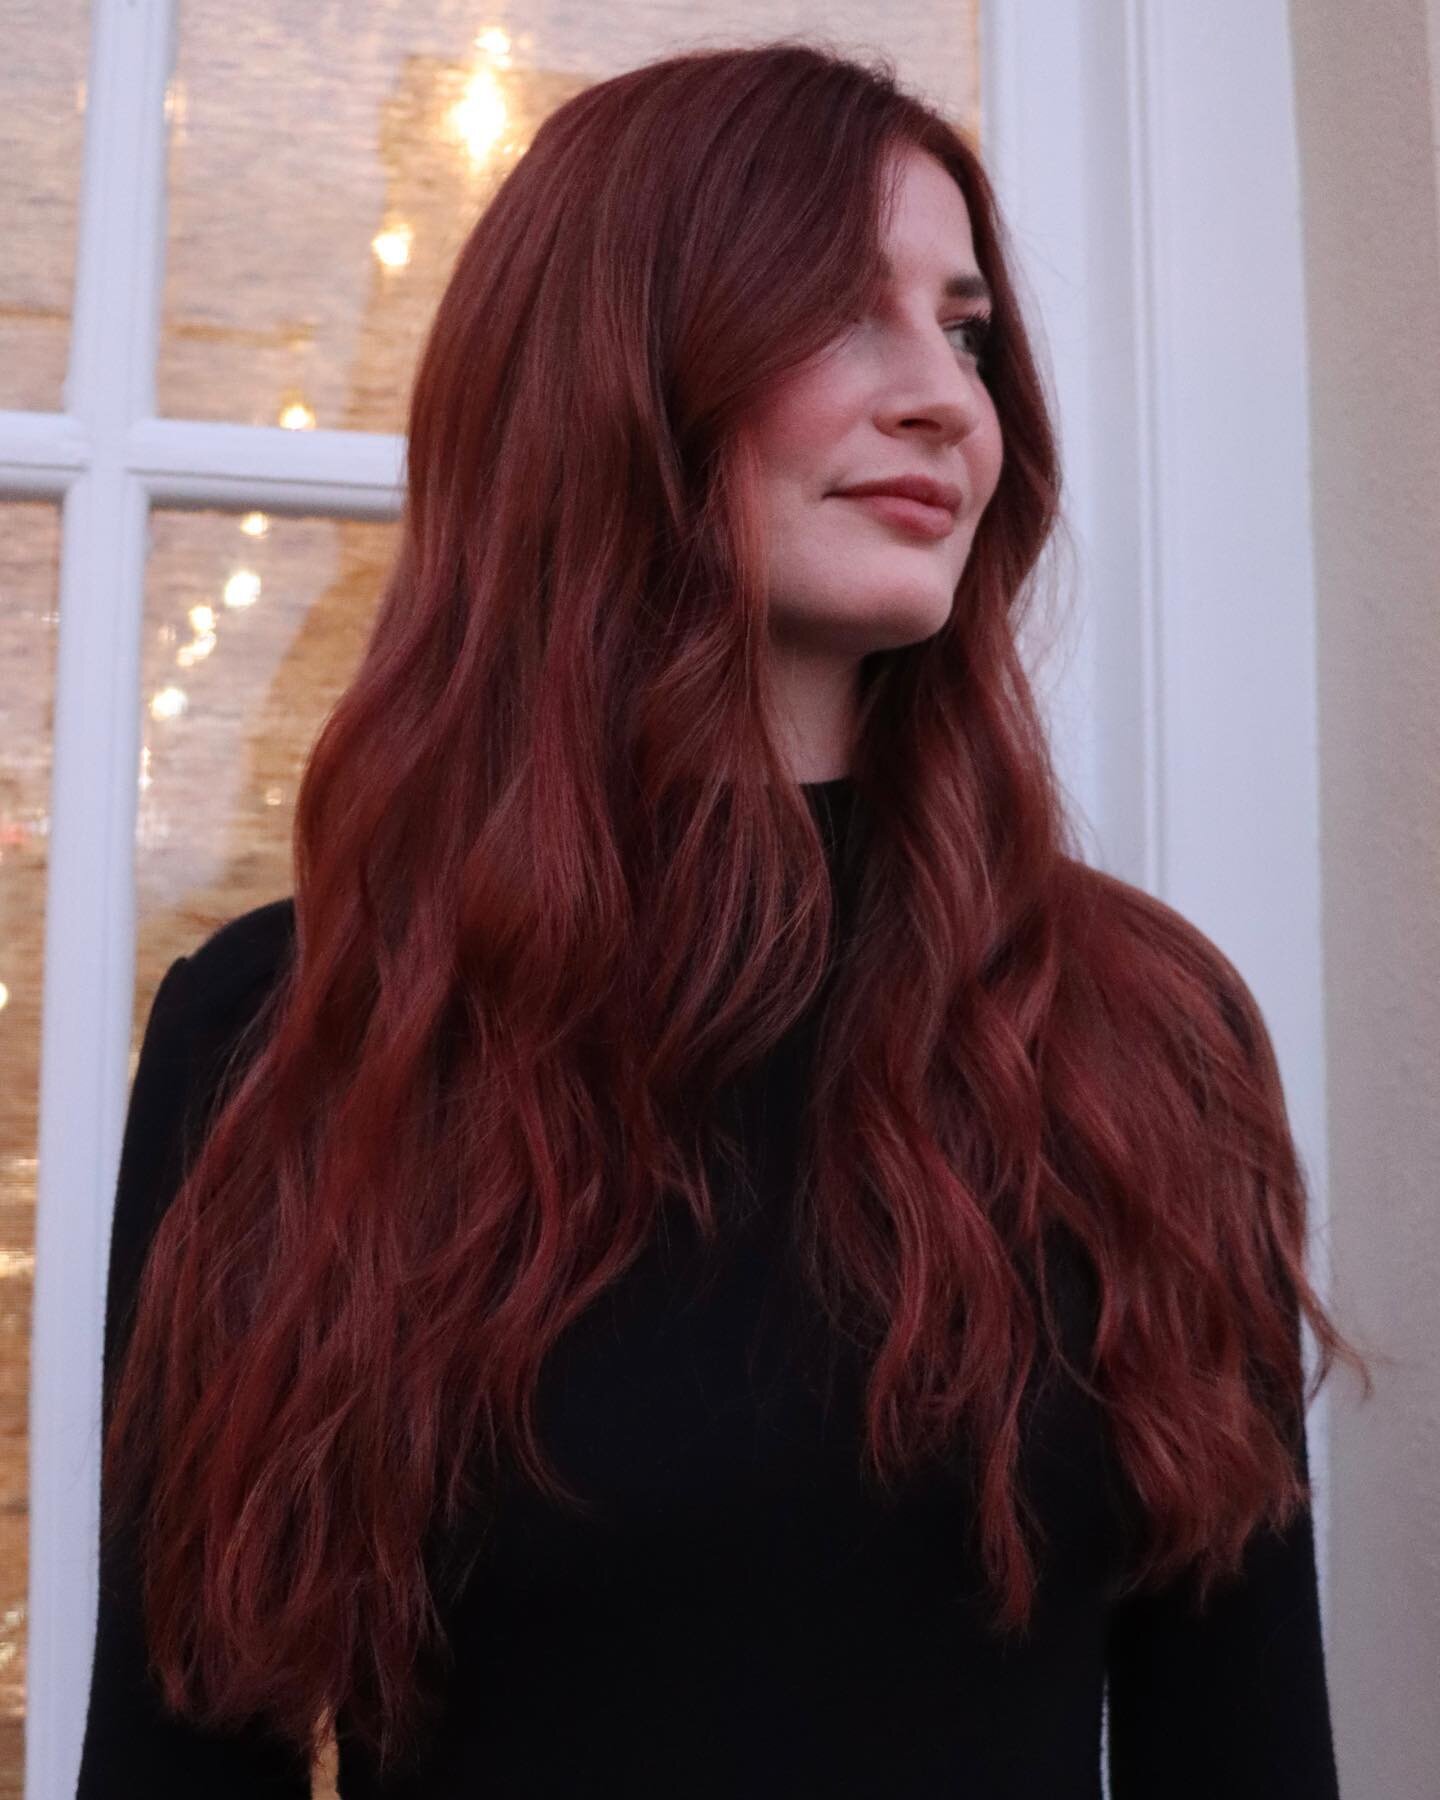 This transformation will be living rent free in our heads forever ❤️

#edenwestsalon #redhair #hairinspo #charlestonsalons #charlestonstylist #chs #downtownchs #lowcountry #thebattery #eastbaystreet #shopsmall #shoplocal